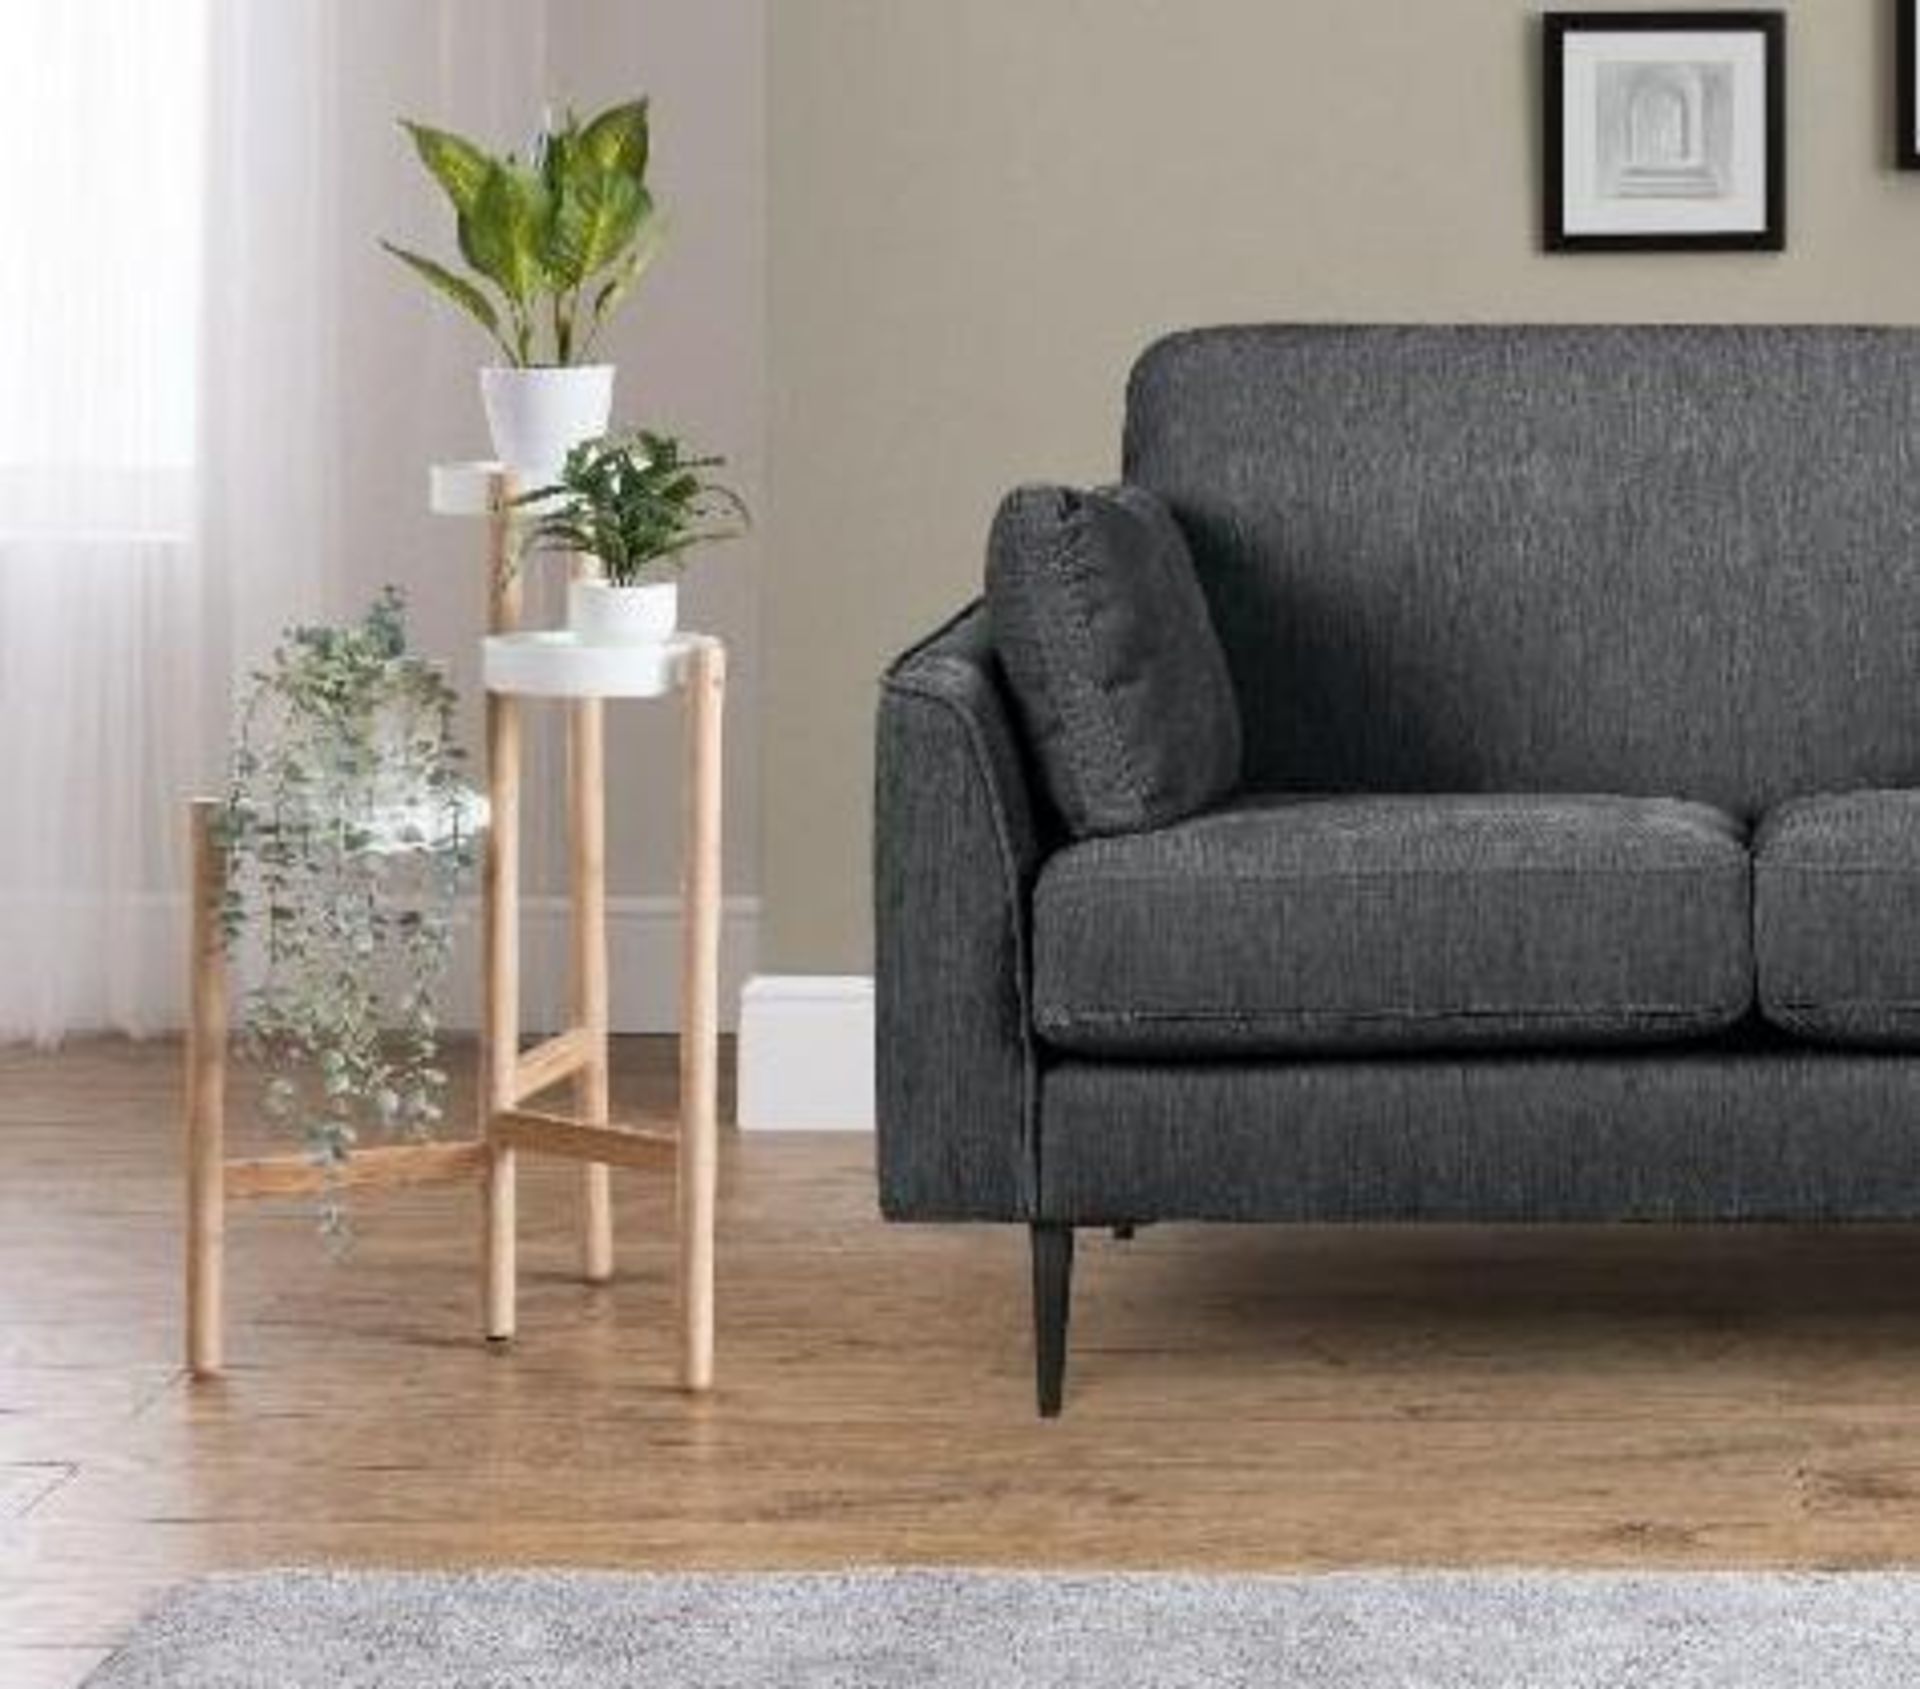 Brand new Boxed Vista 2 seater sofa in Charcoal - Image 2 of 2